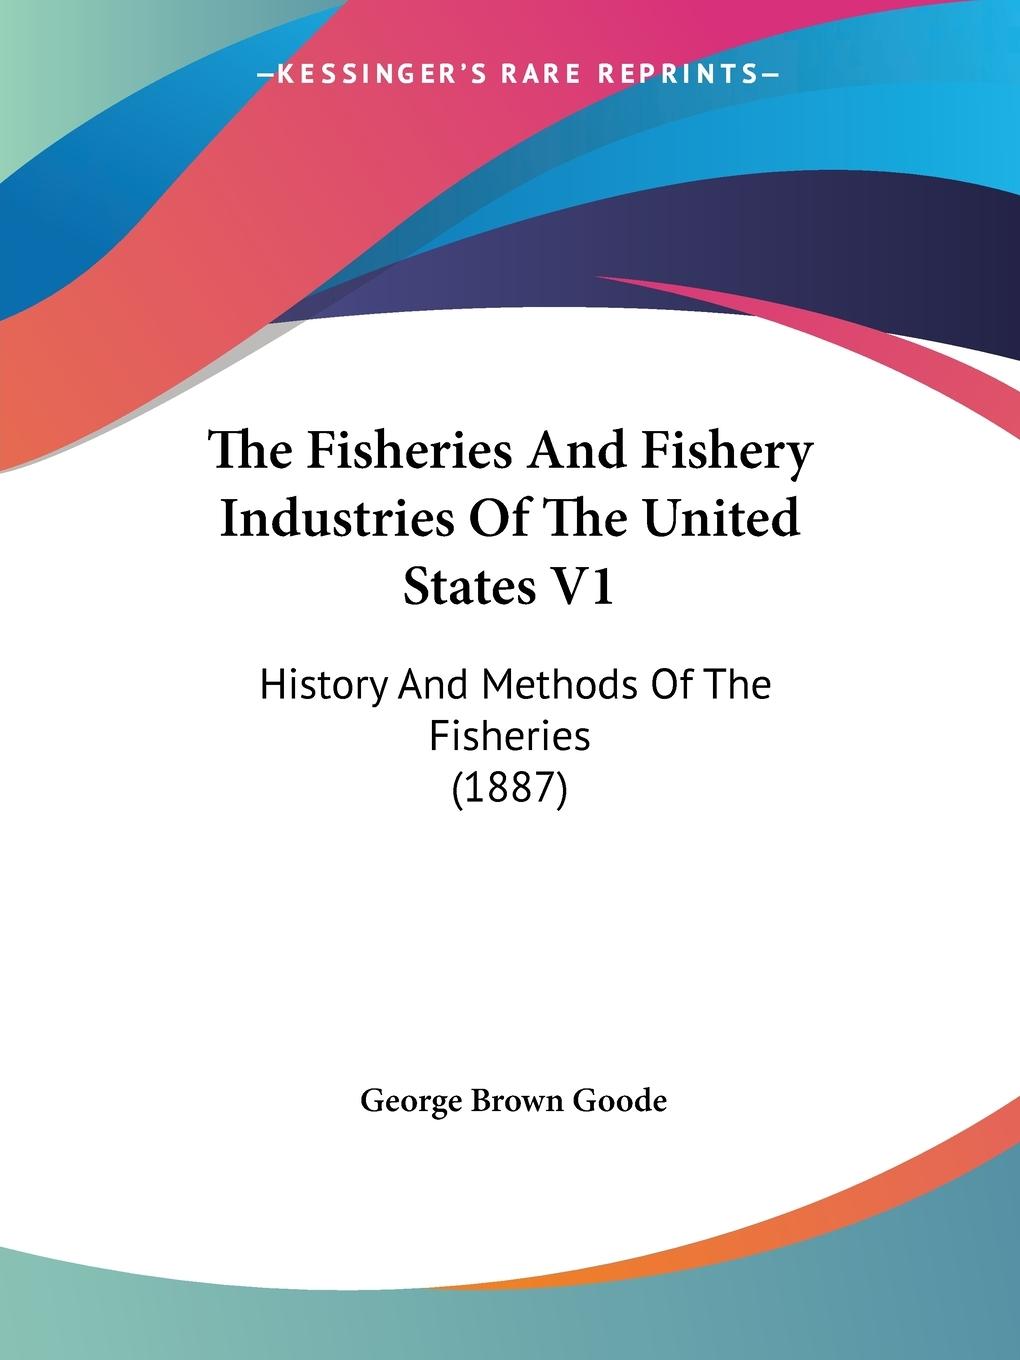 The Fisheries And Fishery Industries Of The United States V1 - Goode, George Brown